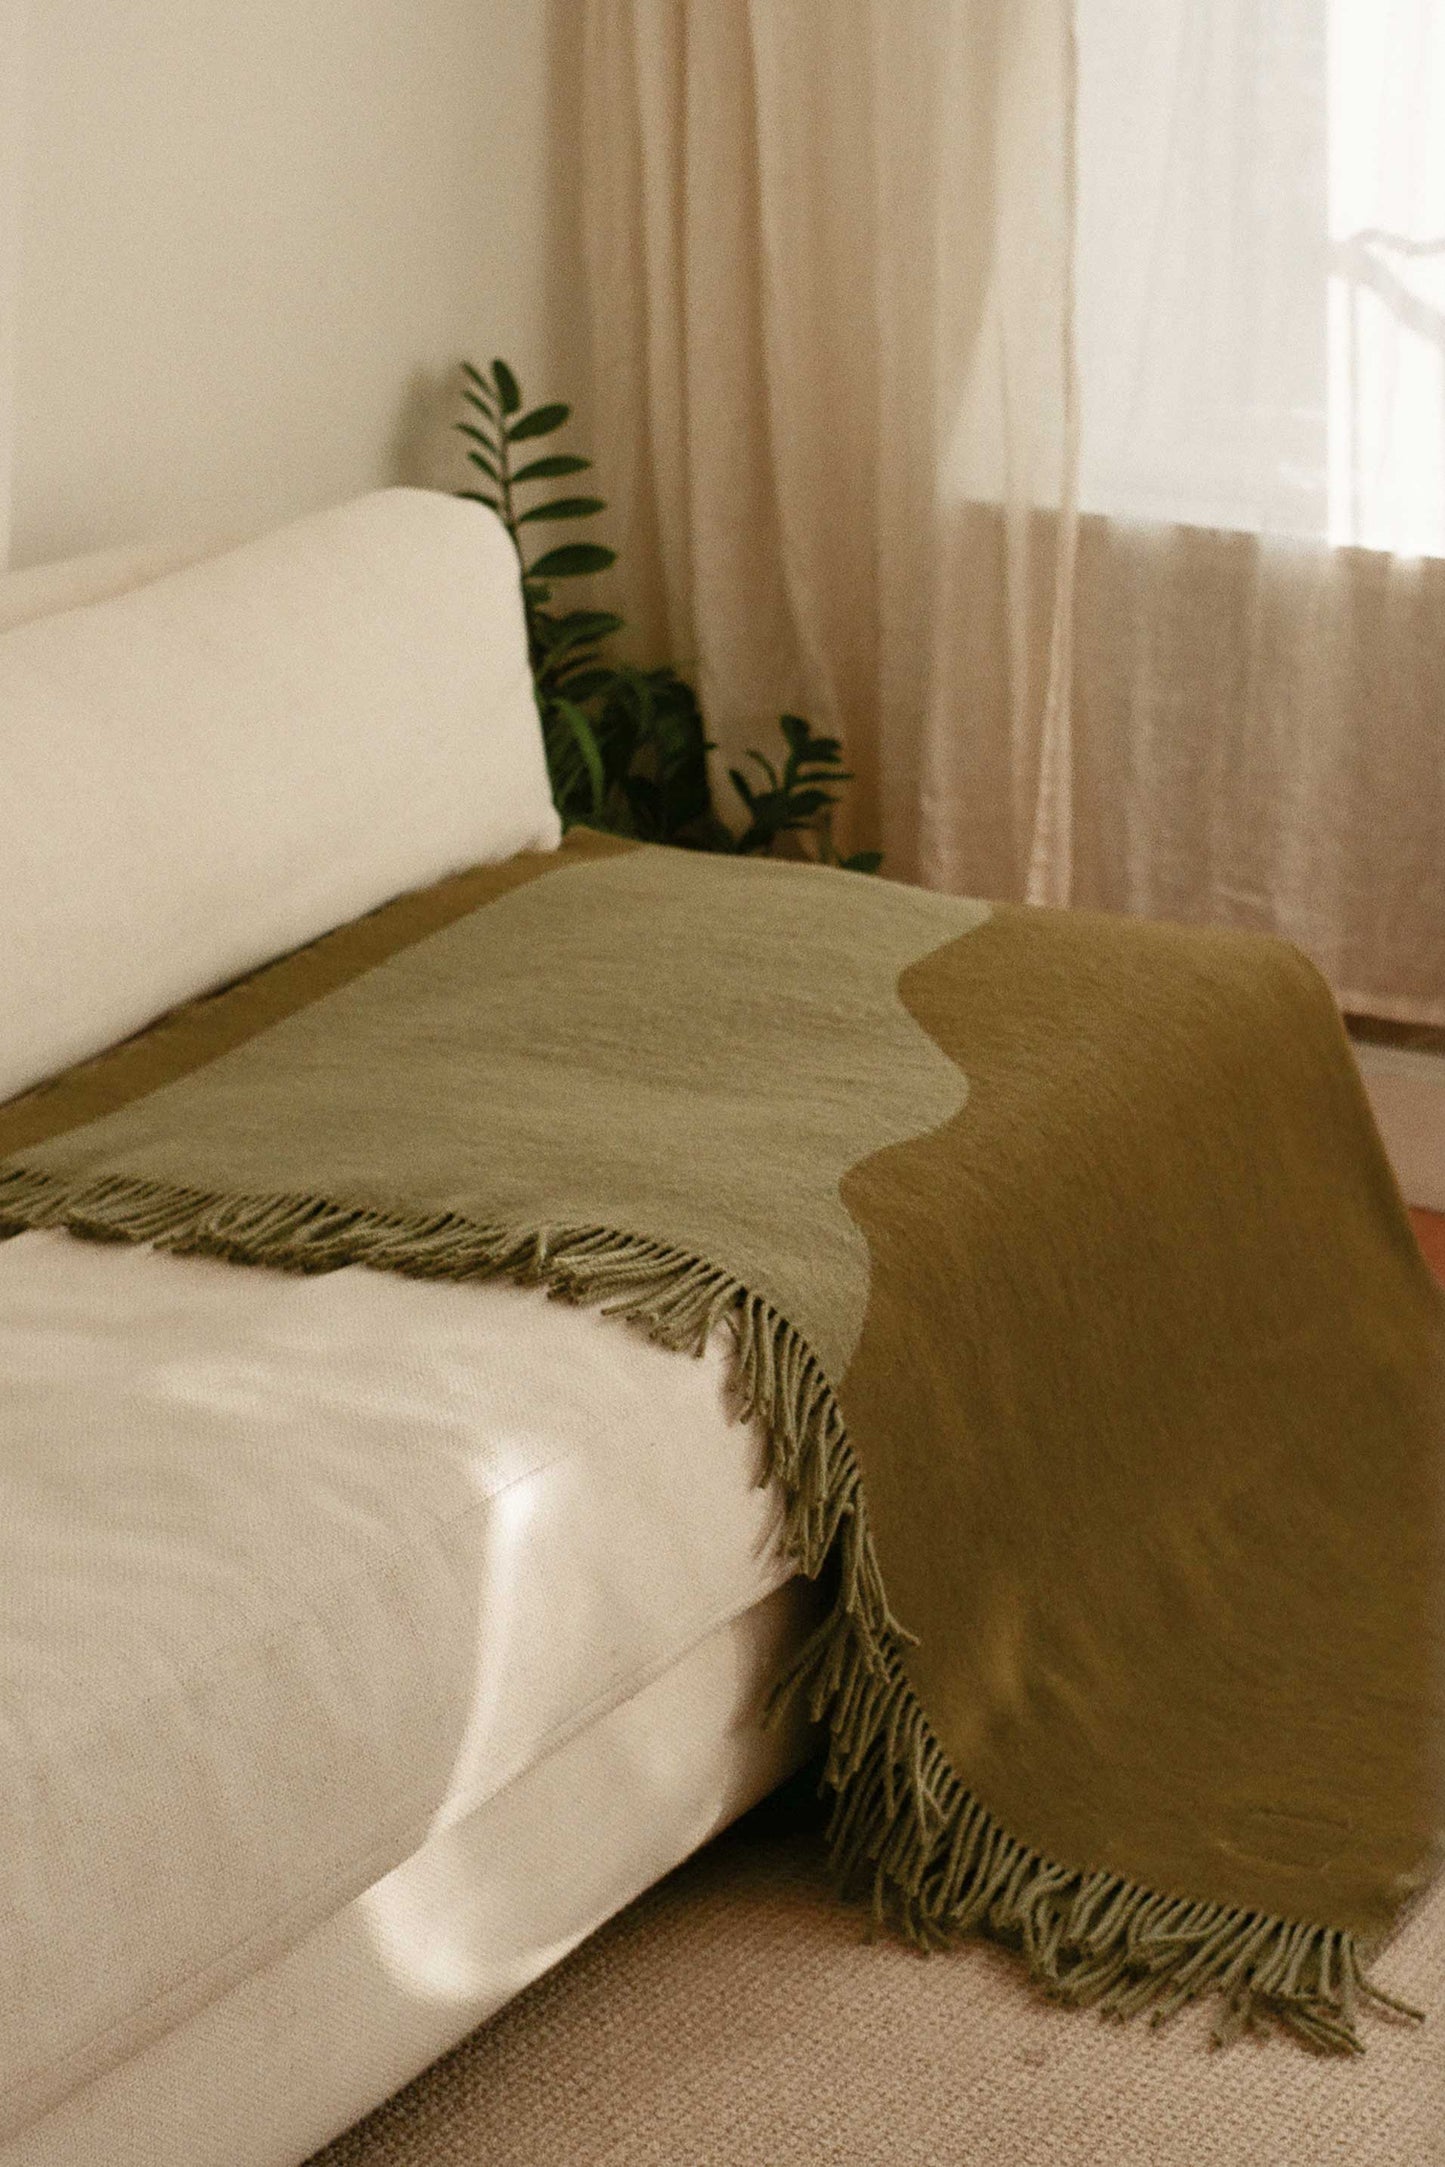 Moss Green Wool Blanket by Forestry Wool displayed on a sofa, adding a cosy and inviting touch to the neutral interior space.